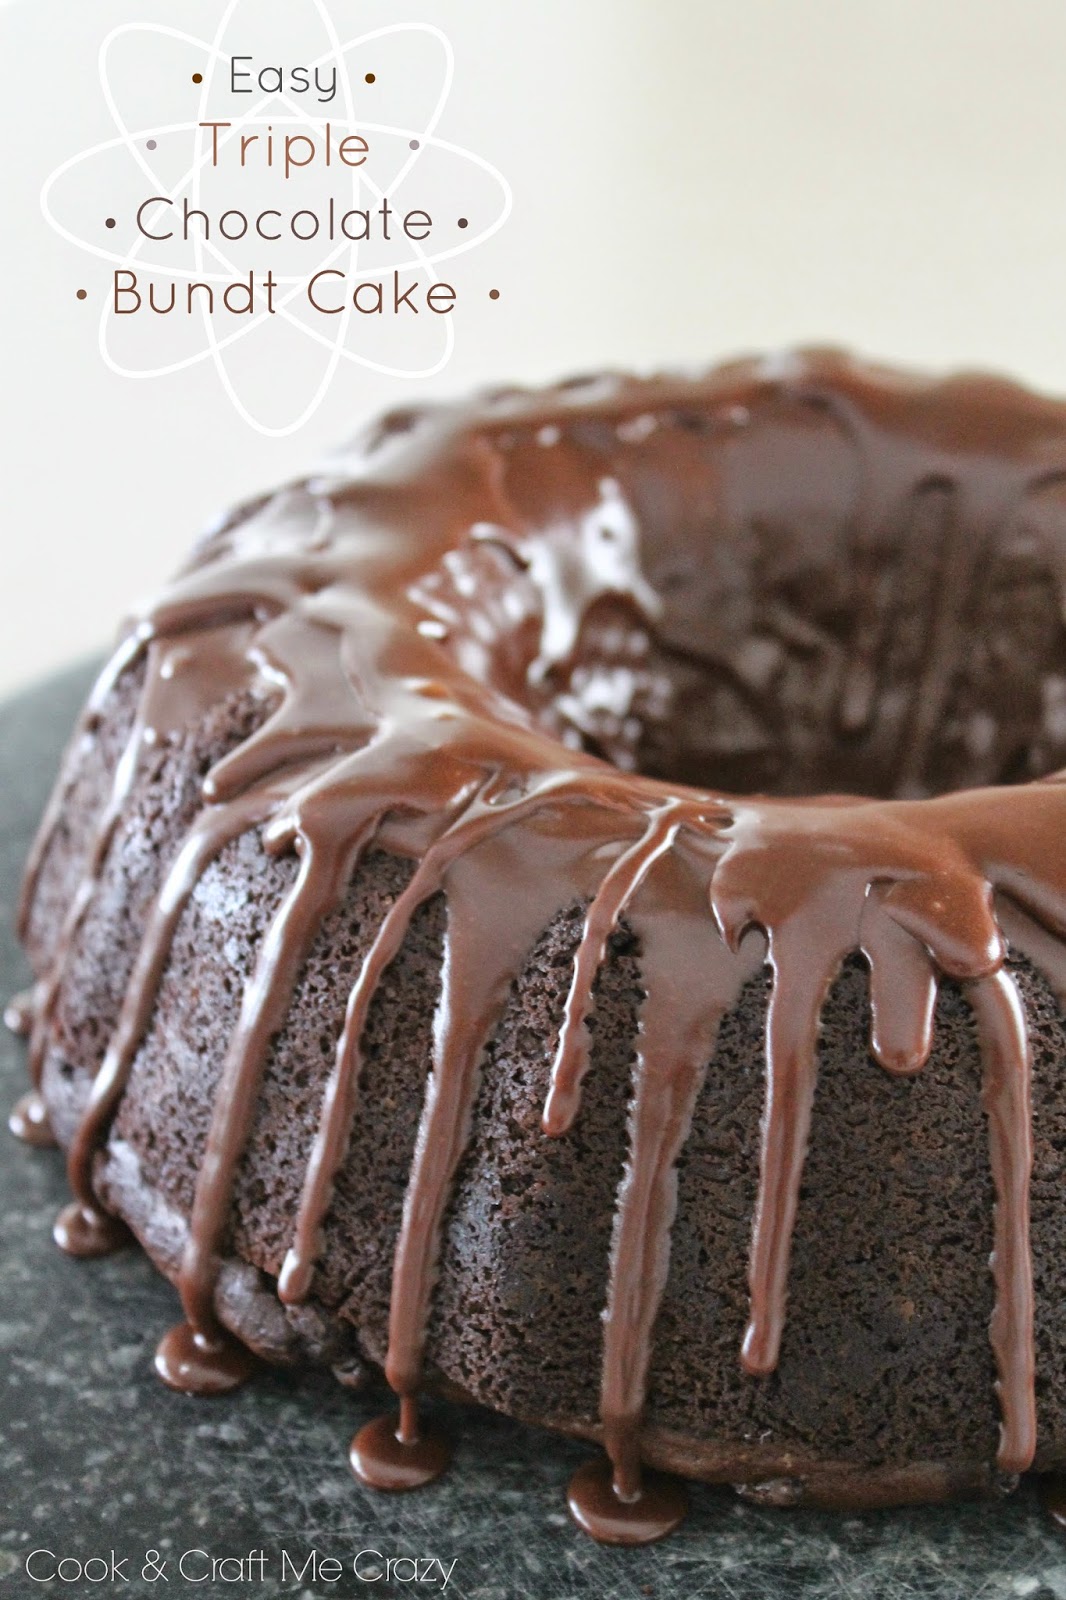 Cook and Craft Me Crazy: Easy Triple Chocolate Bundt Cake